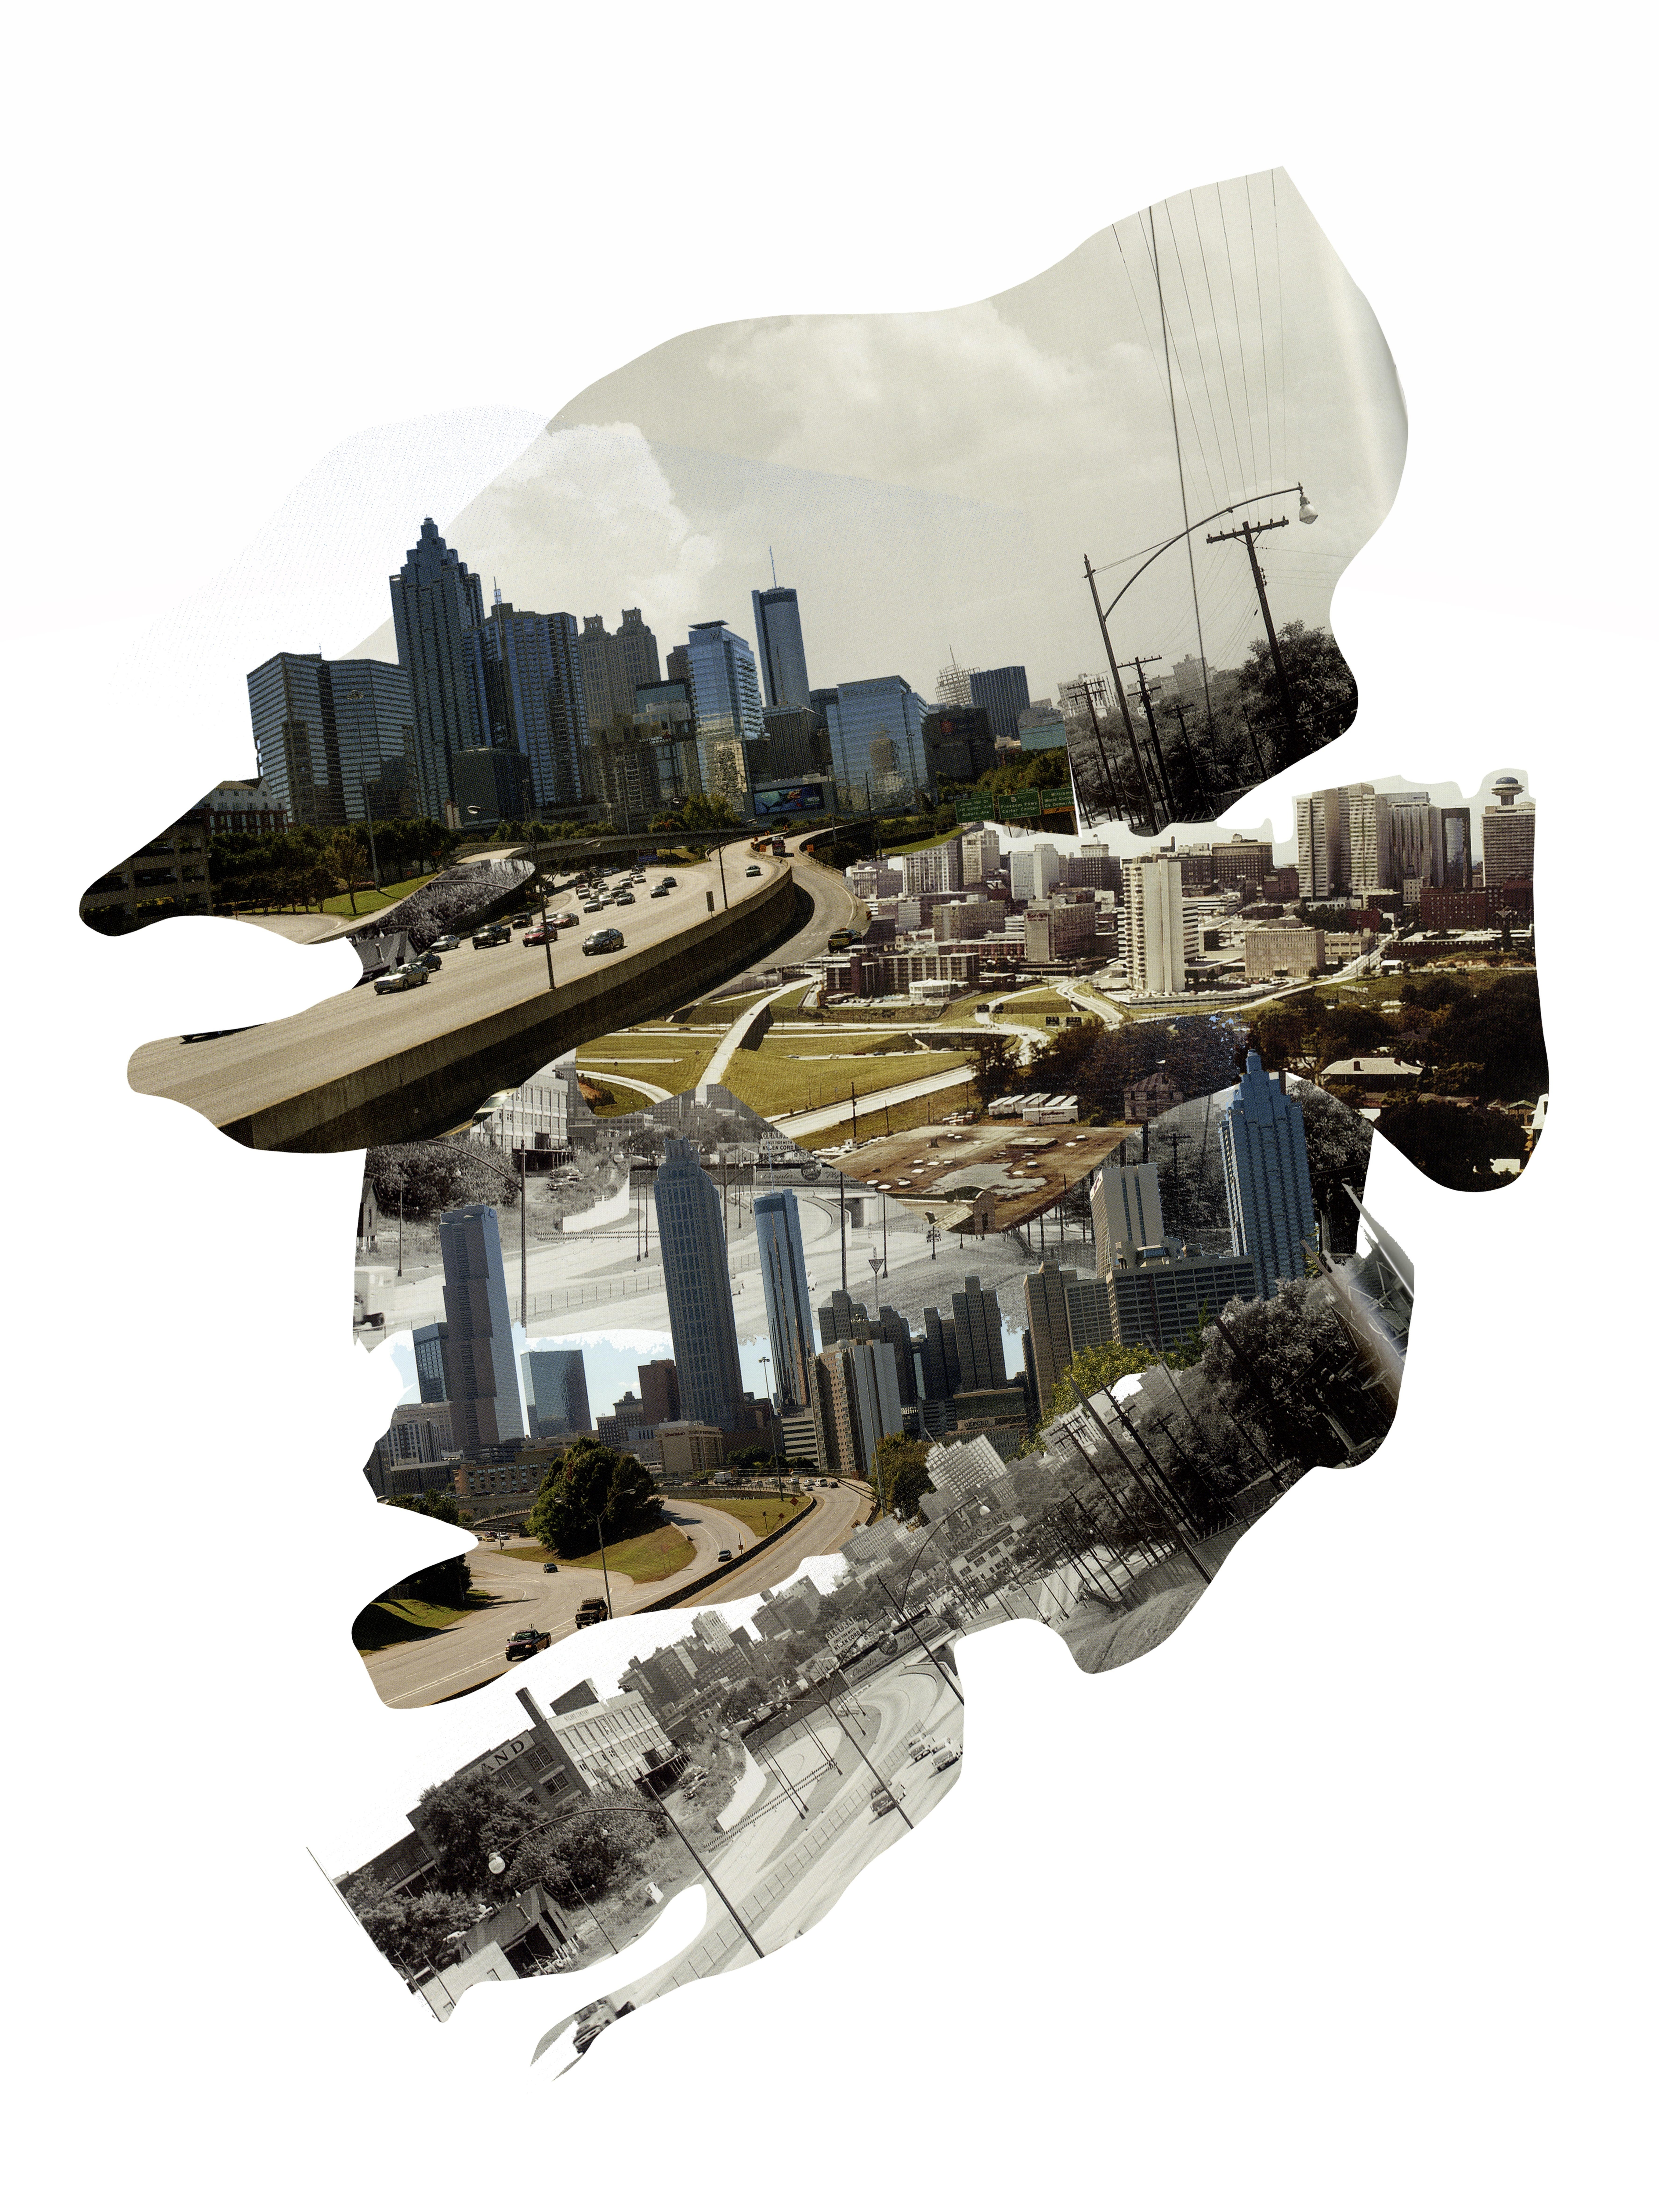 Atlanta Skyline, 2019 by Ying Chen
From the series "Lost In Transition".
Archival pigment print
Image size: 80 in. H x 60 in. W
Edition of 5 + 1AP
Unframed
 
The artwork employs collage to fuse the ornate features of traditional architecture with